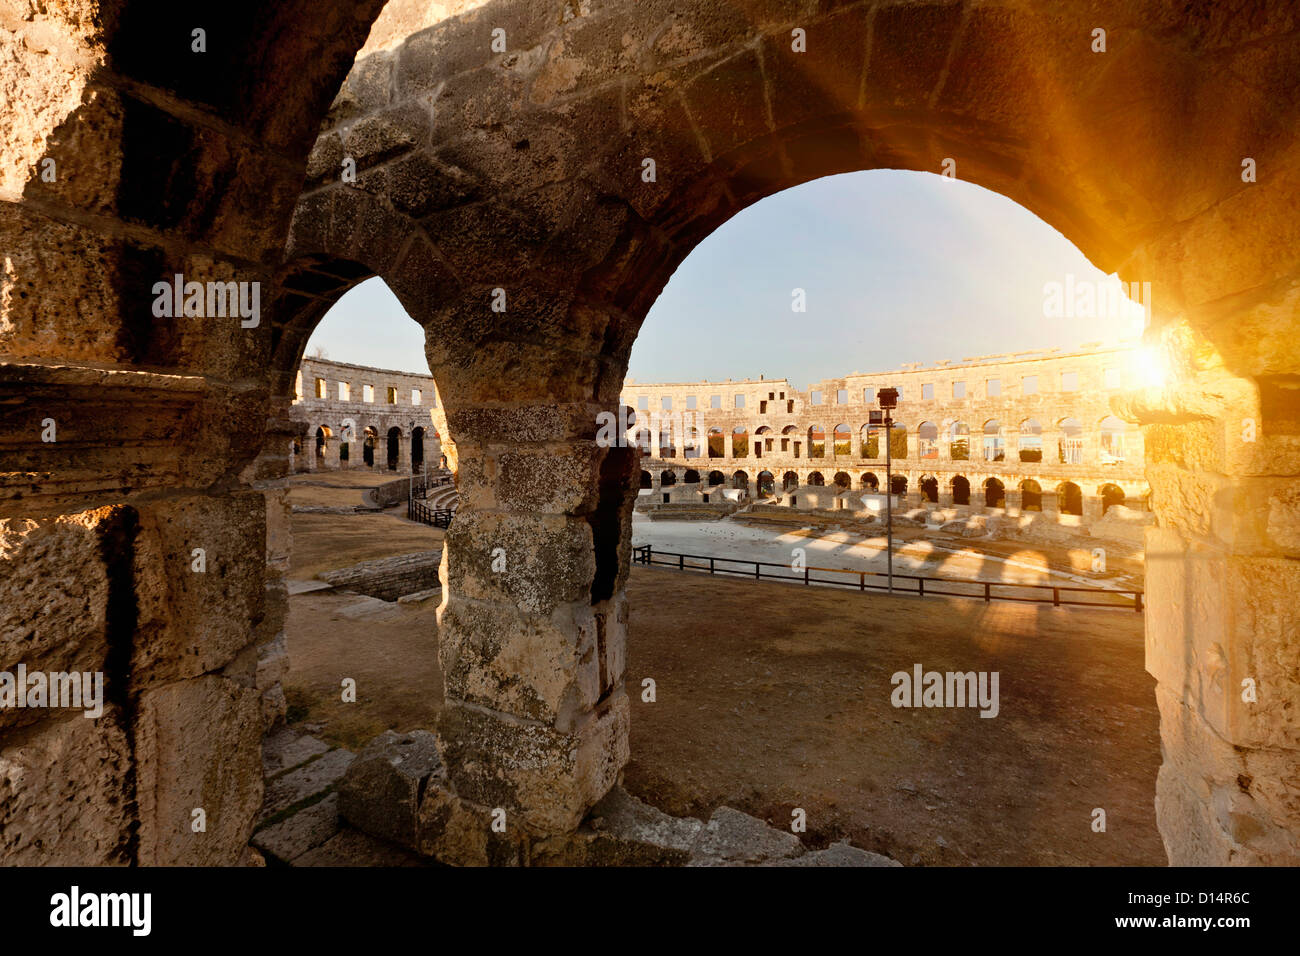 Ancient ruins of arena Stock Photo